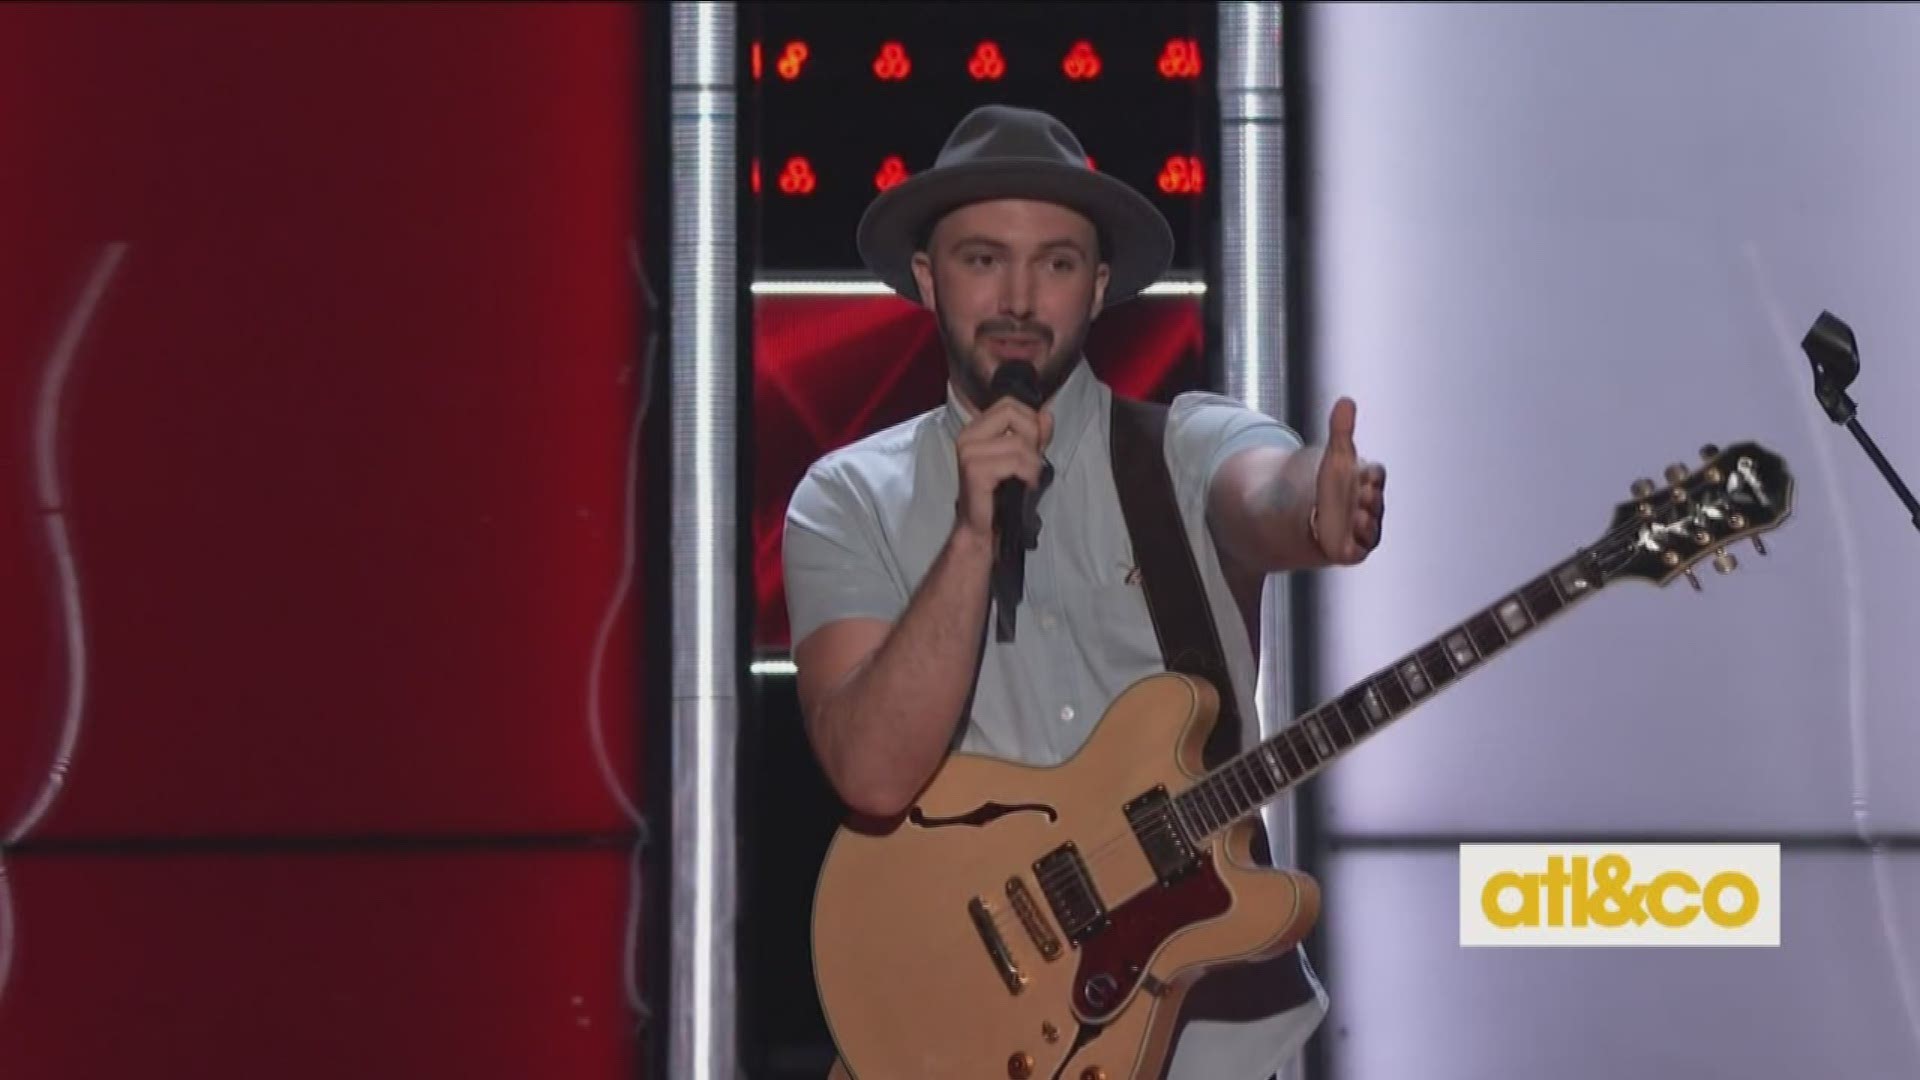 Atlanta-based singer/songwriter Alex Guthrie and friend of A&C rocked it on 'The Voice' premiere on 11Alive and chose Team Kelly!